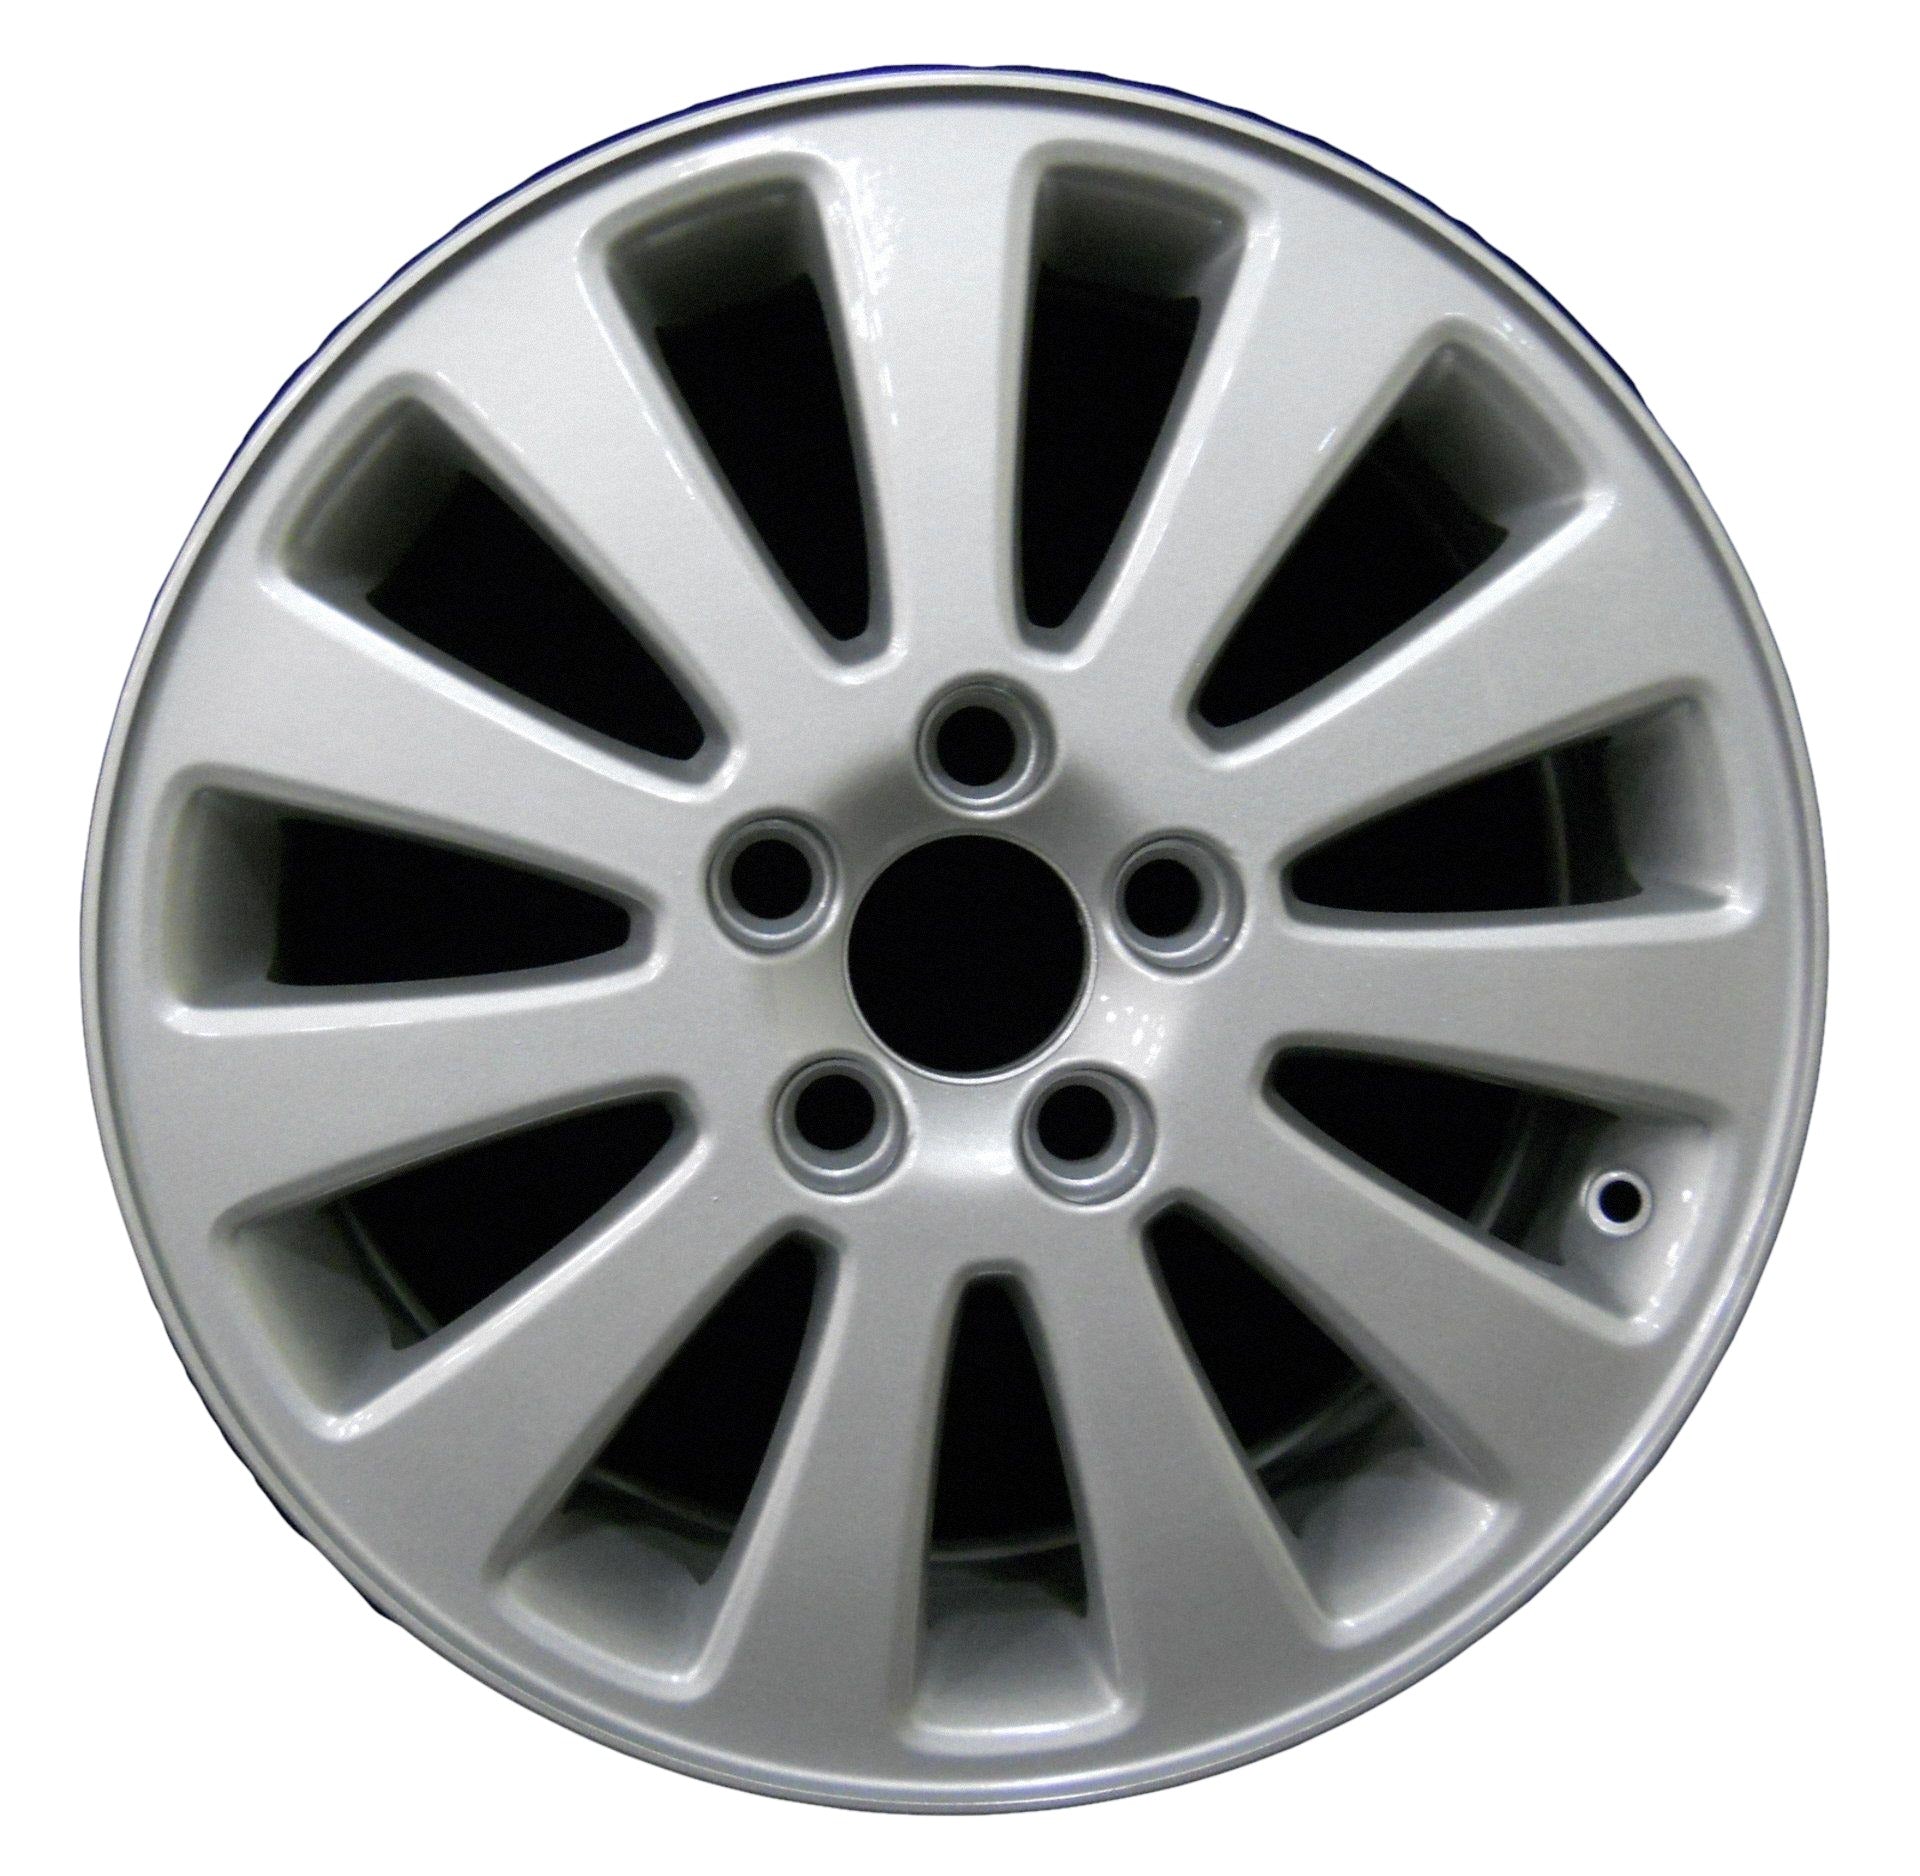 Volvo 40 Series  2004, 2005, 2006, 2007 Factory OEM Car Wheel Size 16x6.5 Alloy WAO.70290.PS12.FF